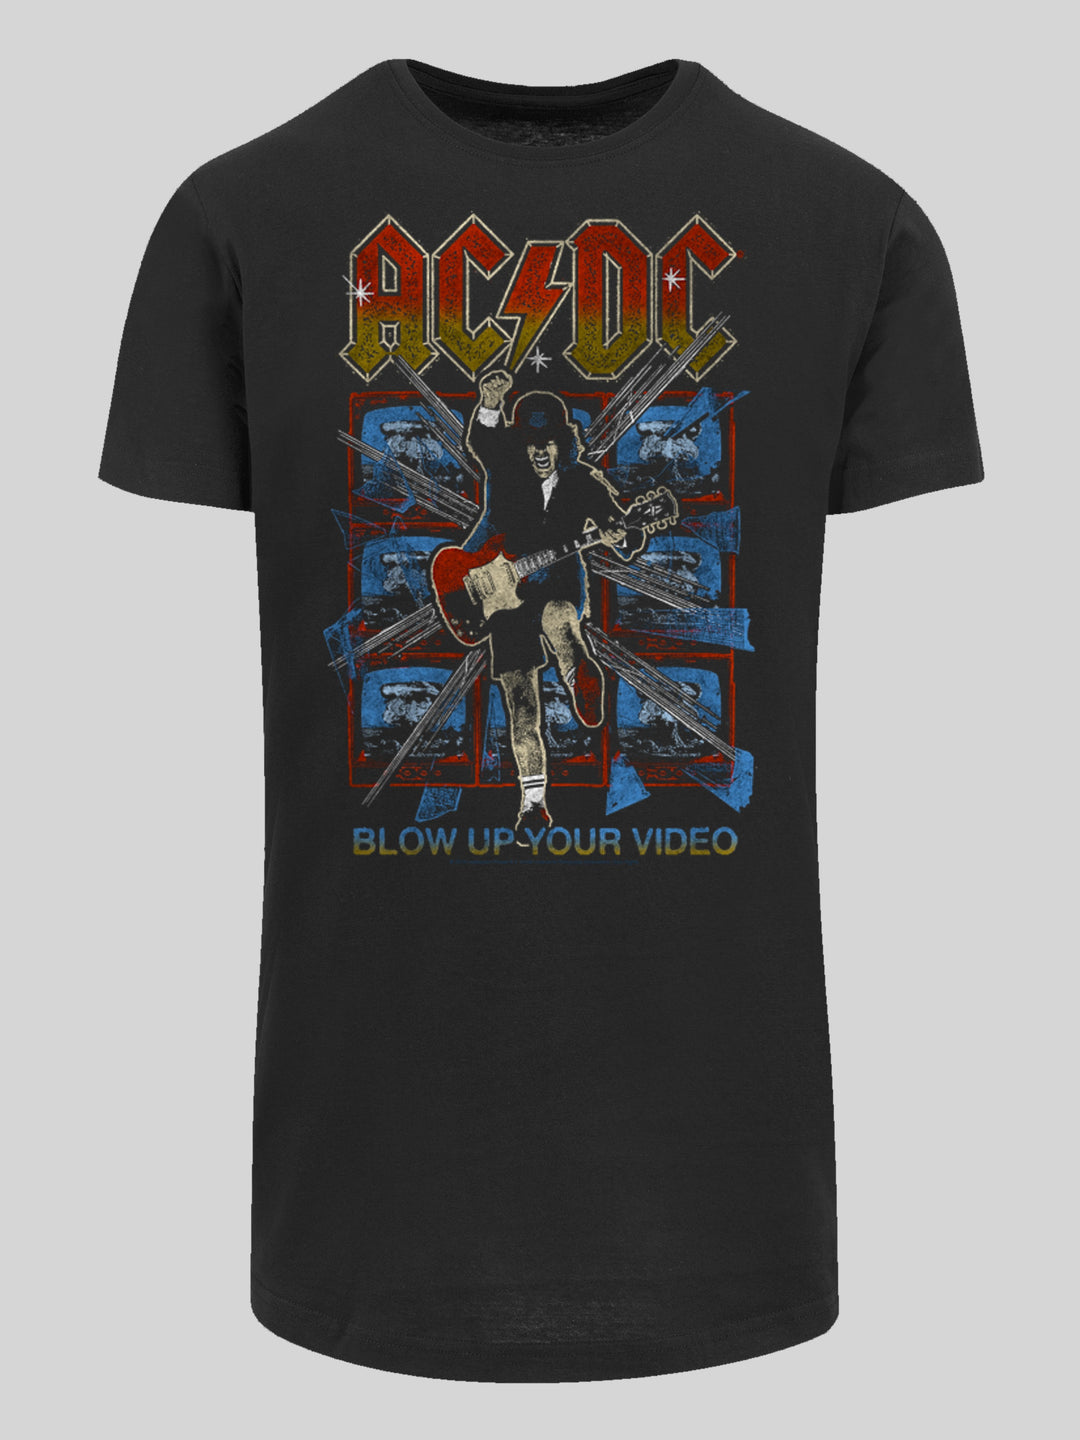 ACDC T-Shirt | Blow Up Your Video | Extra Long Men T Shirt